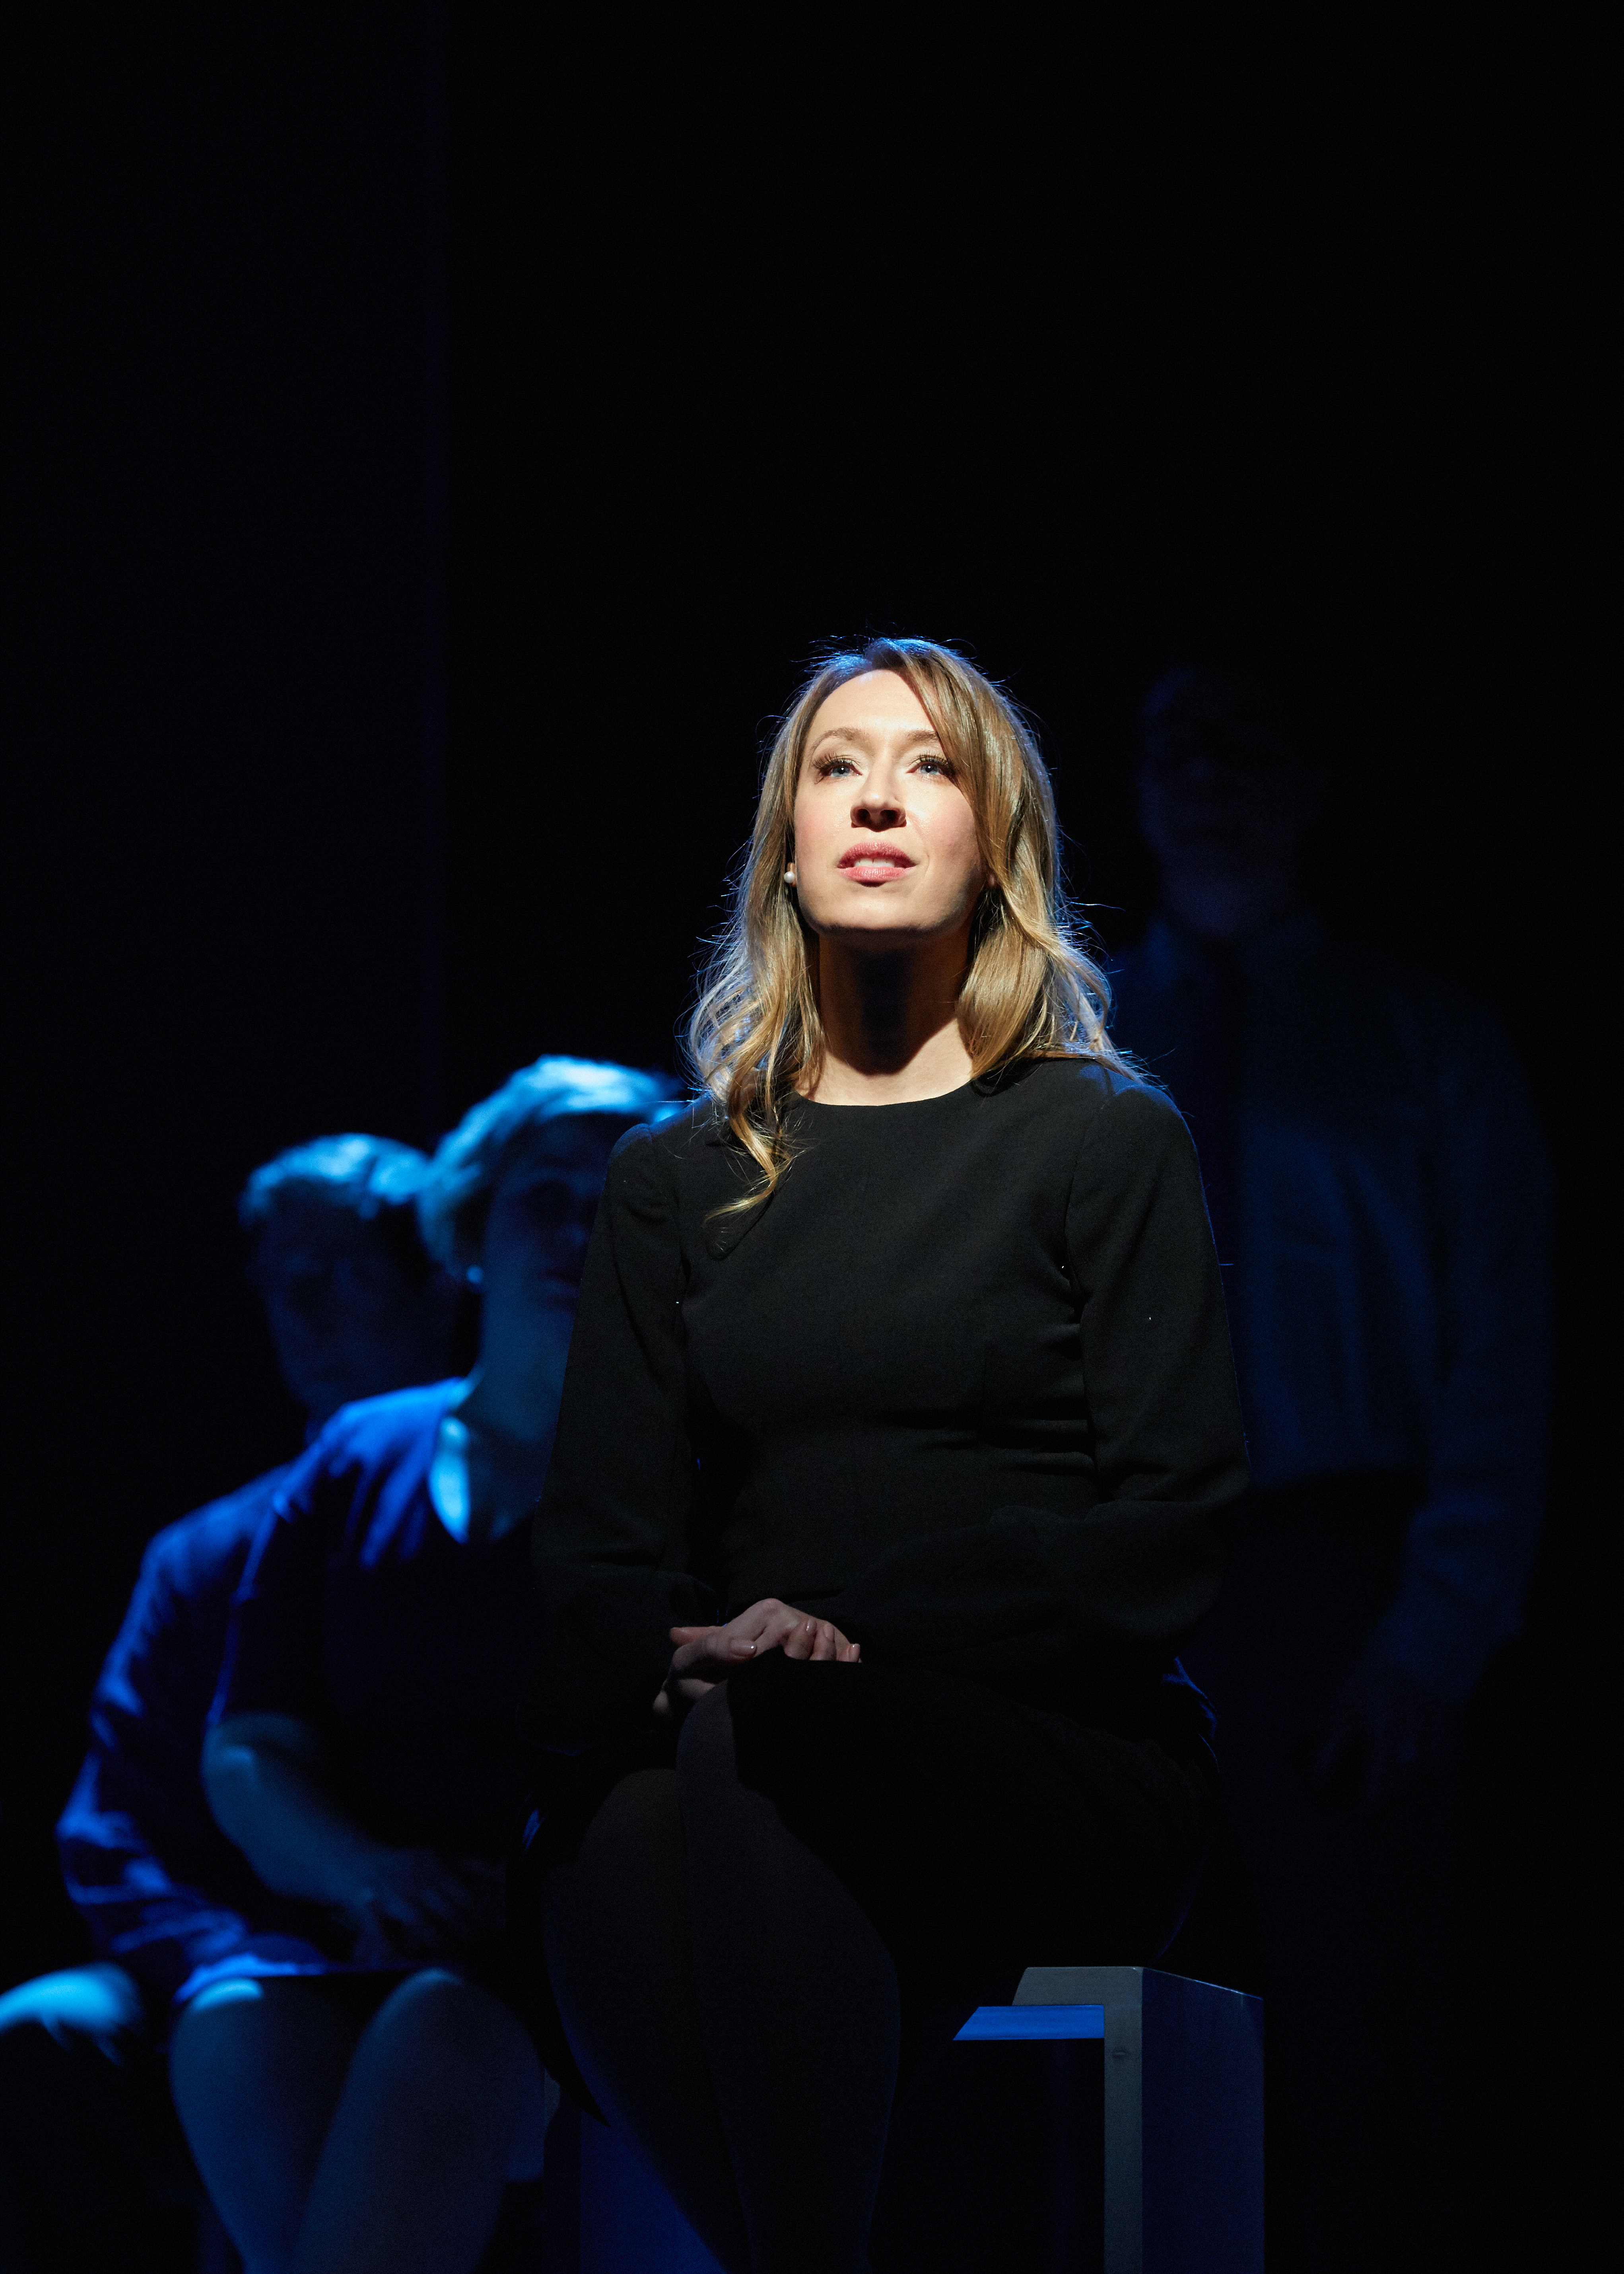 As Laurene Powell Jobs in The [R]evolution of Steve Jobs with Seattle Opera. Photo: Philip Newton